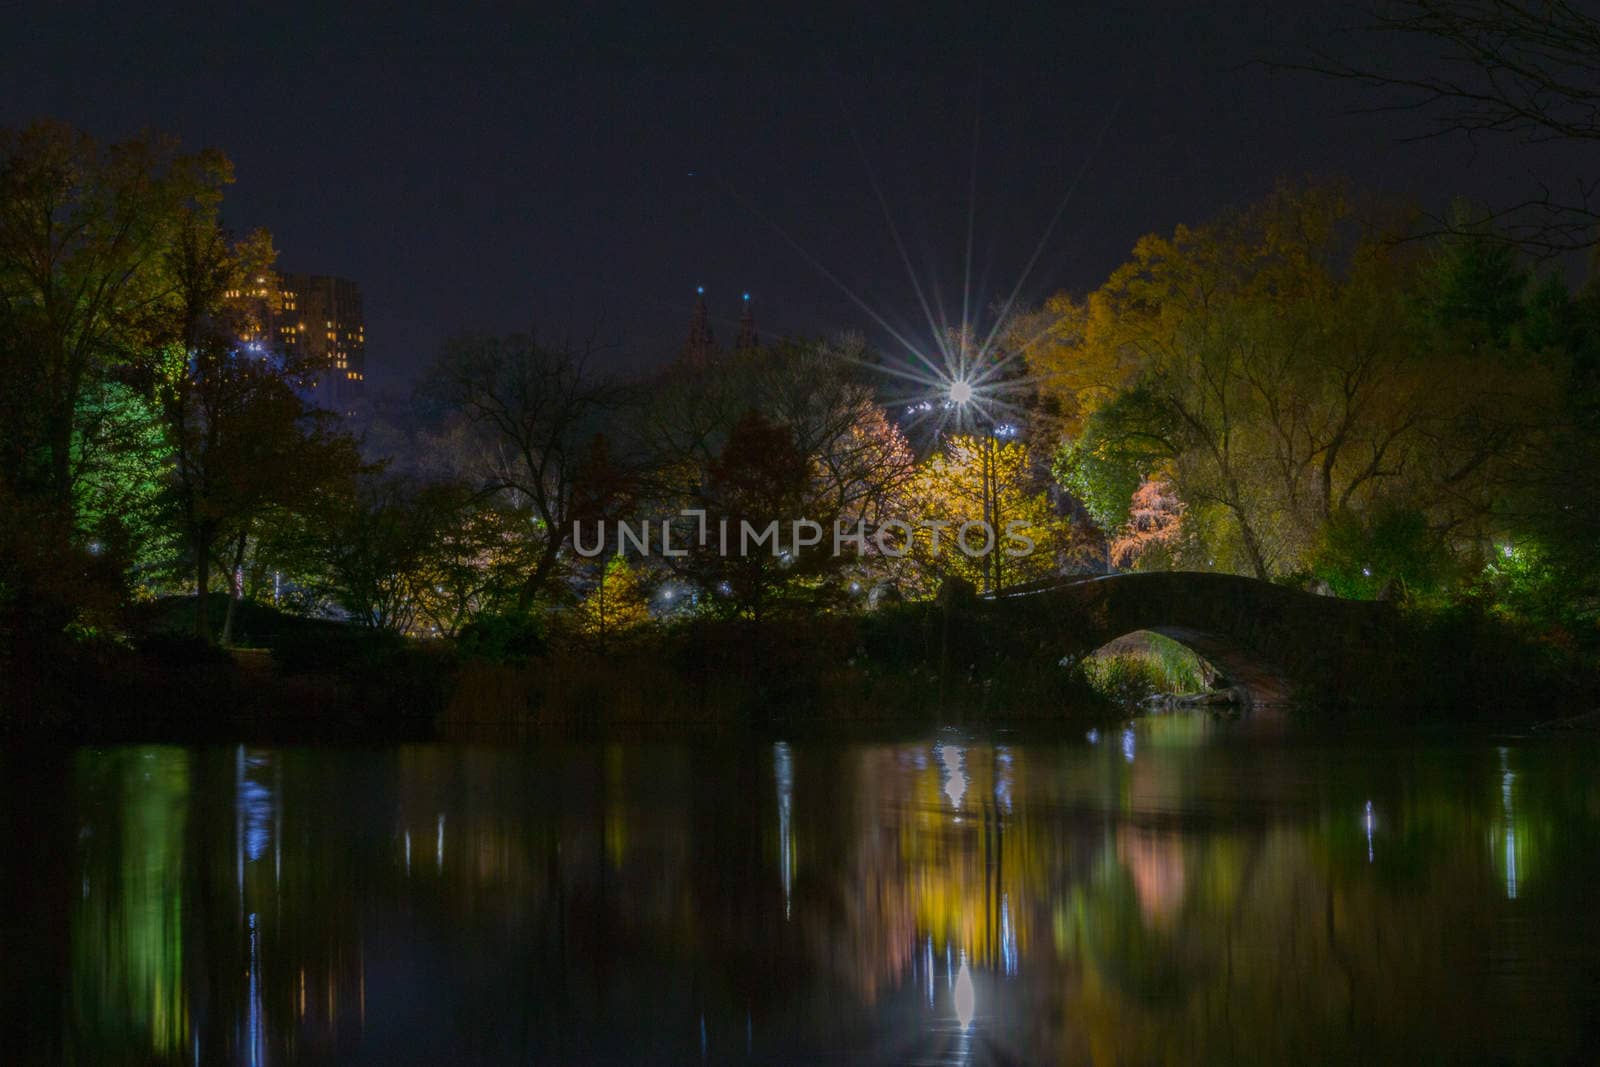 Long exposure photography of Gapstow Bridge in Central Park